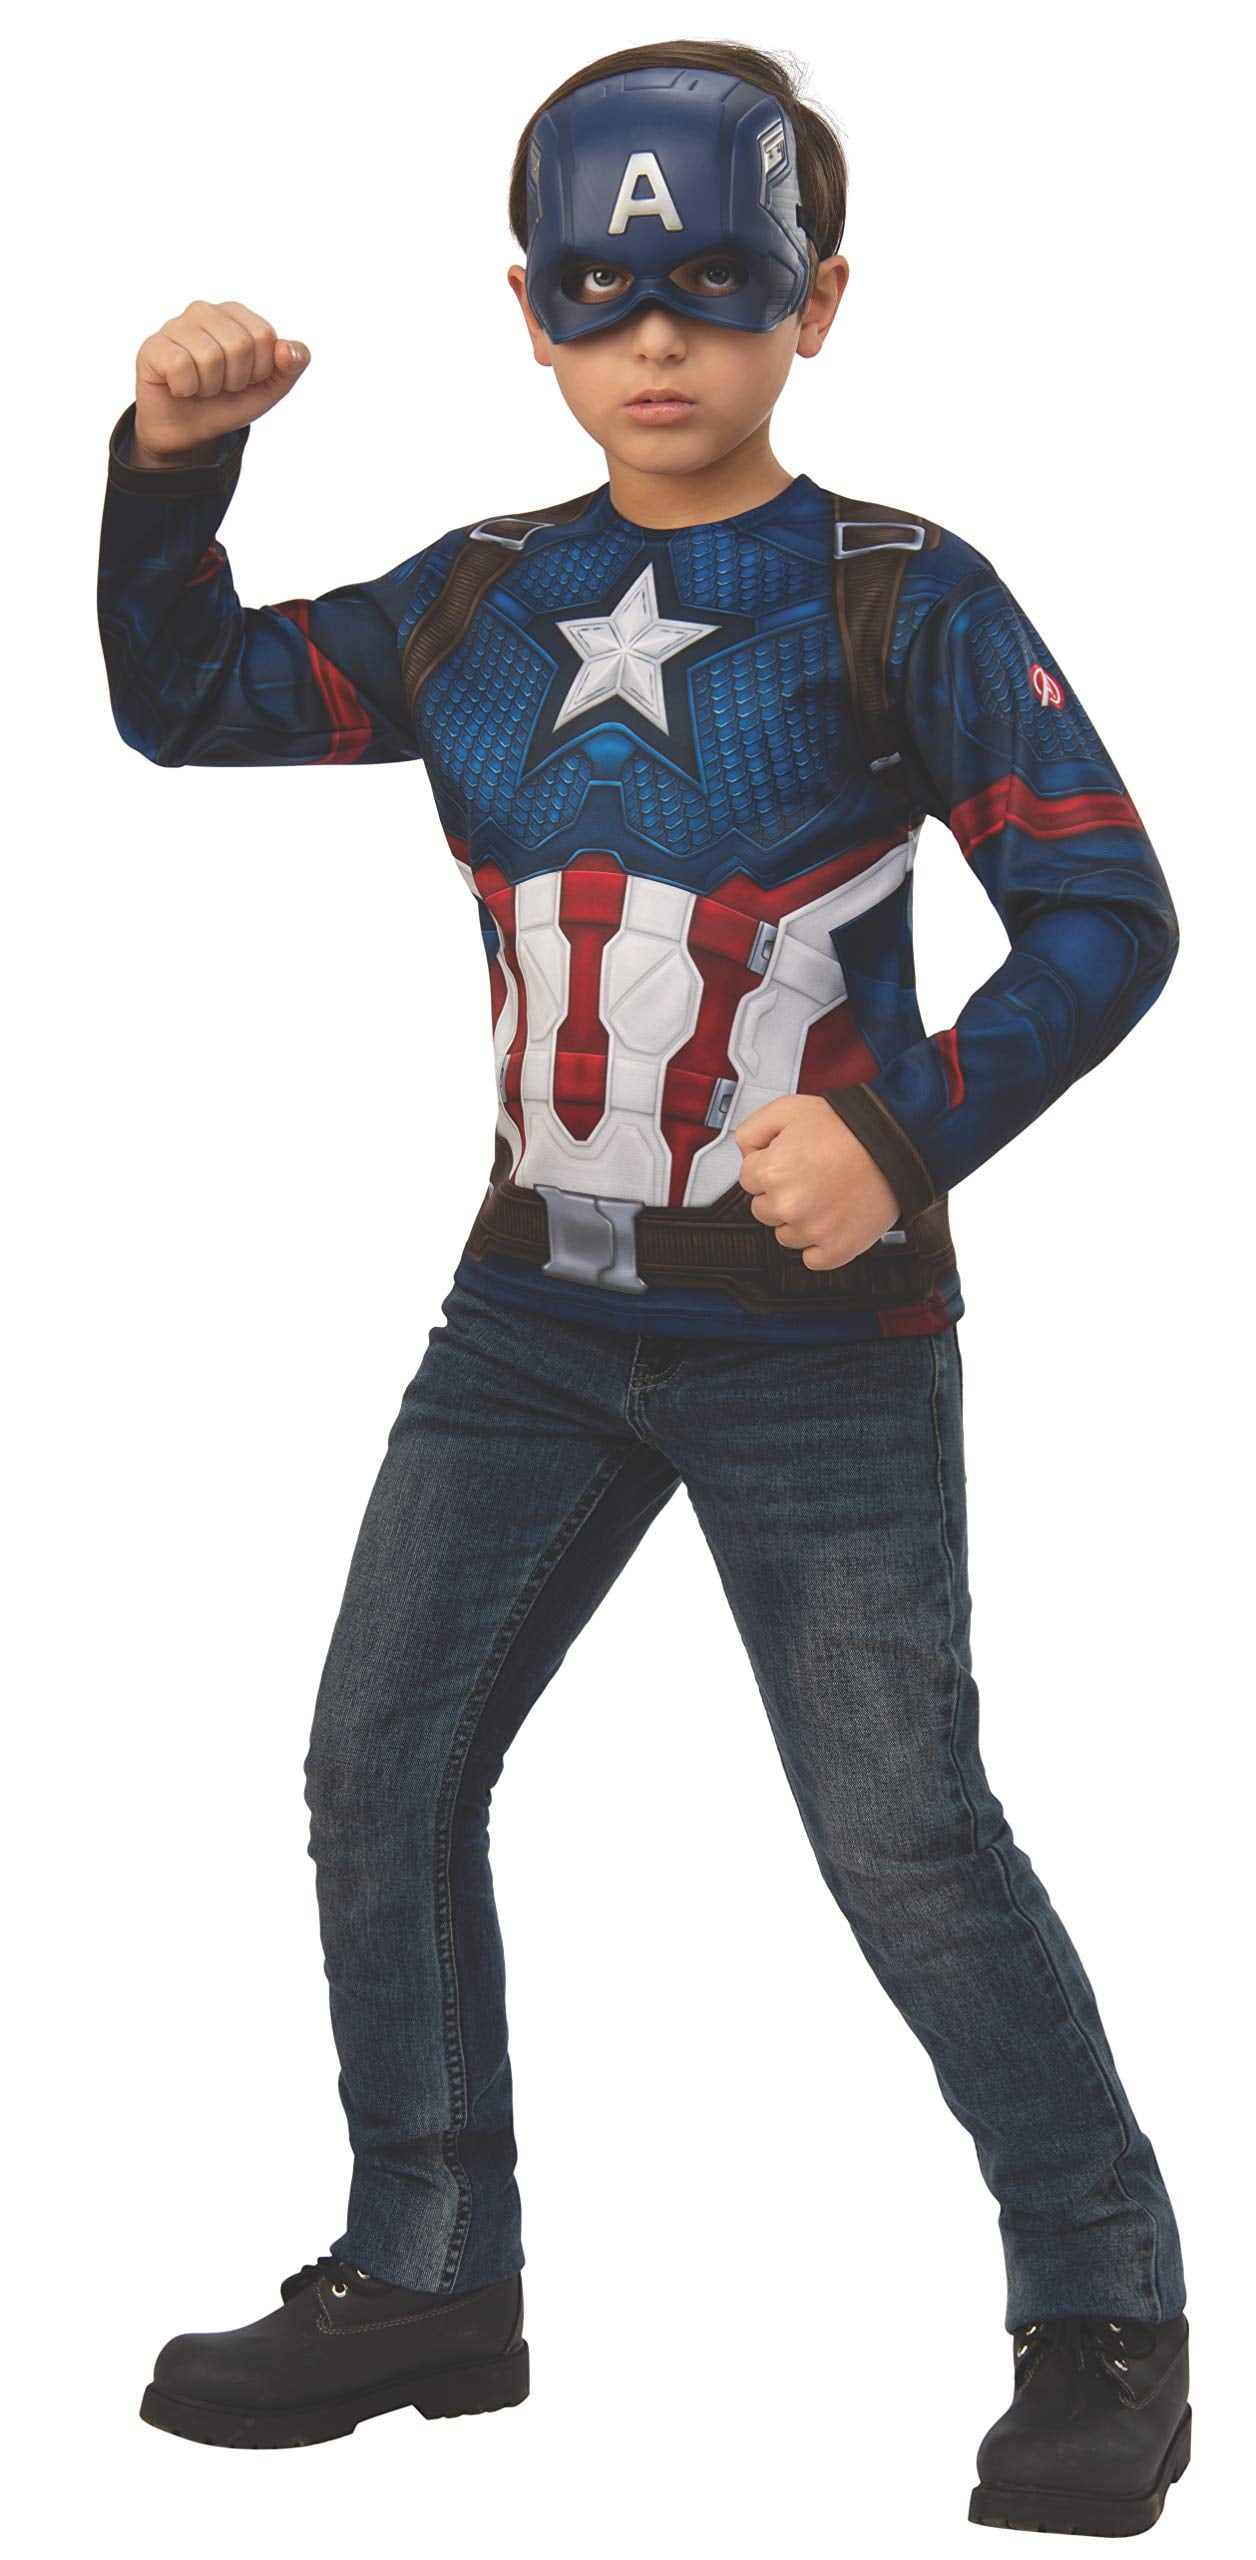 NEW Marvel Avengers End Game kids Captain America Hoodies T-Shirt With Mask 